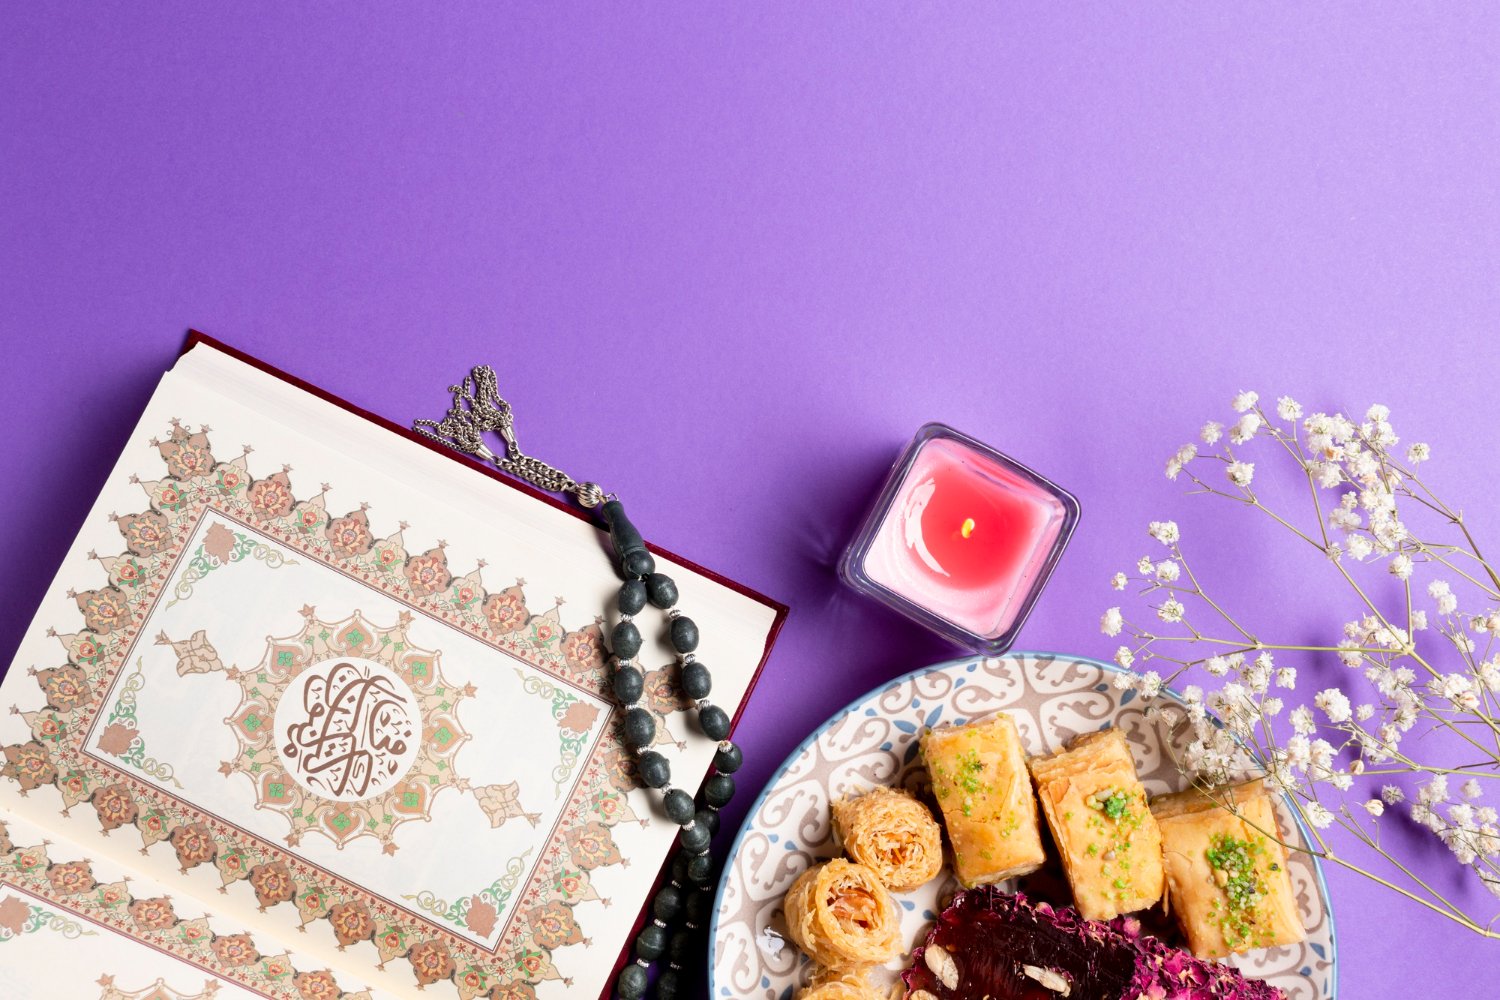 Beautiful Gifts For Loved Ones on Eid